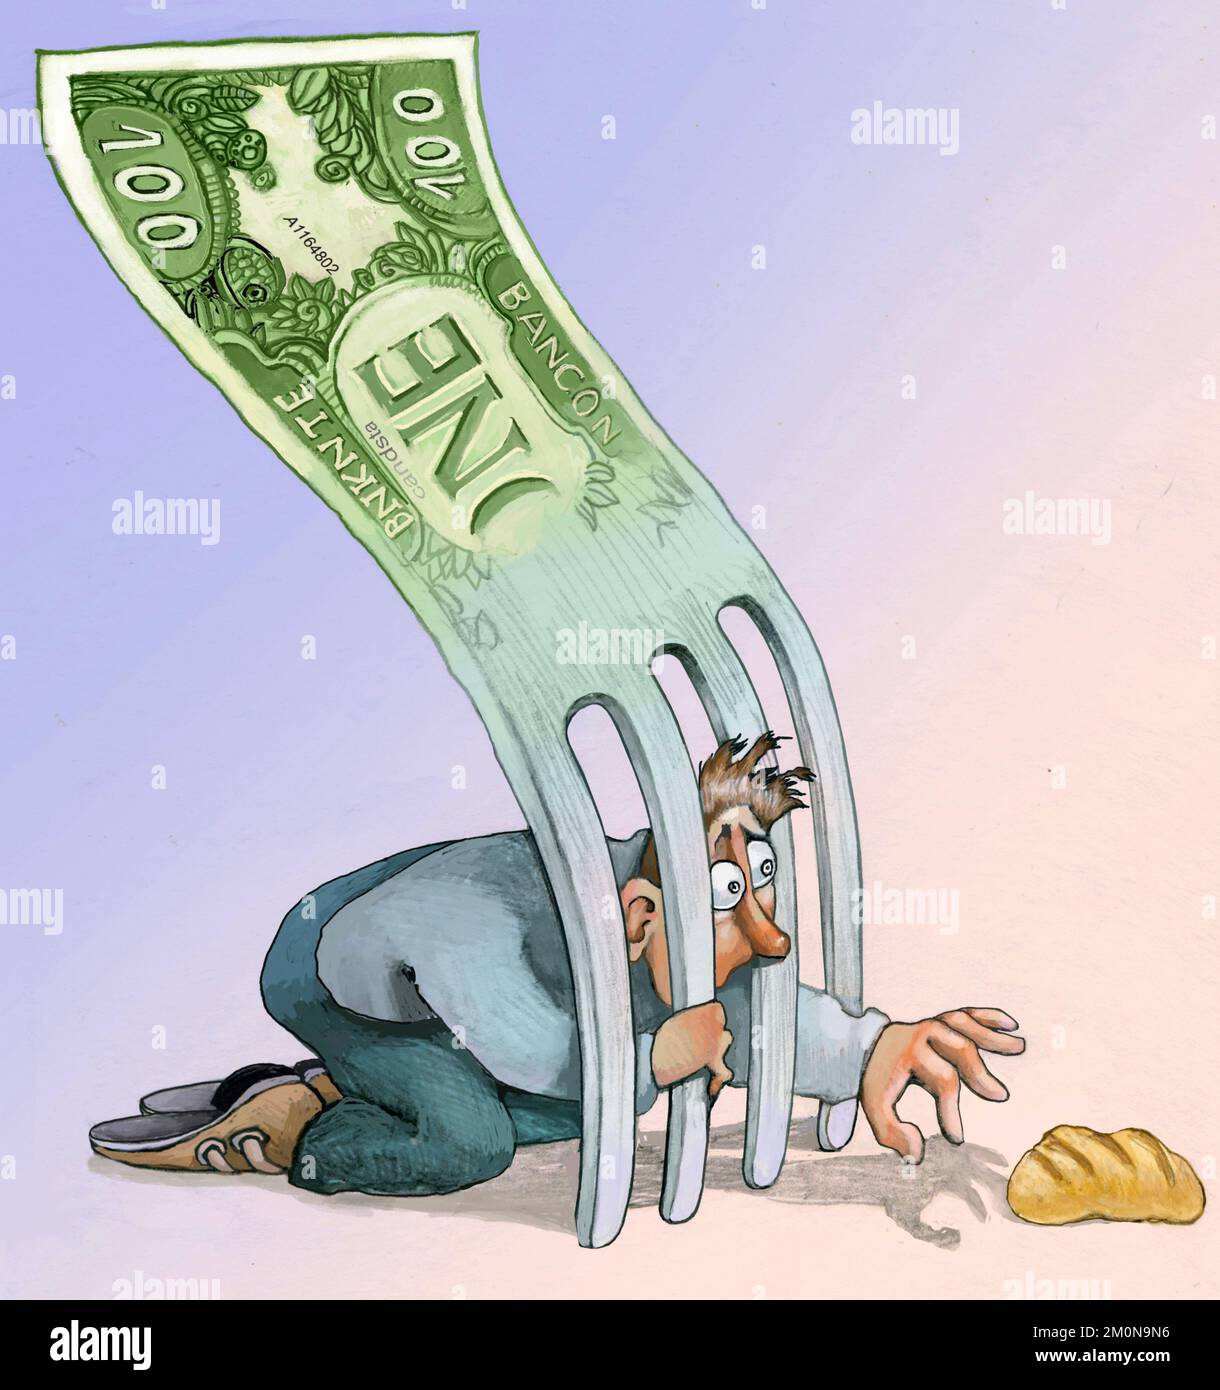 a worker tries to reach for some bread but is blocked by a fork created from a banknote Stock Photo